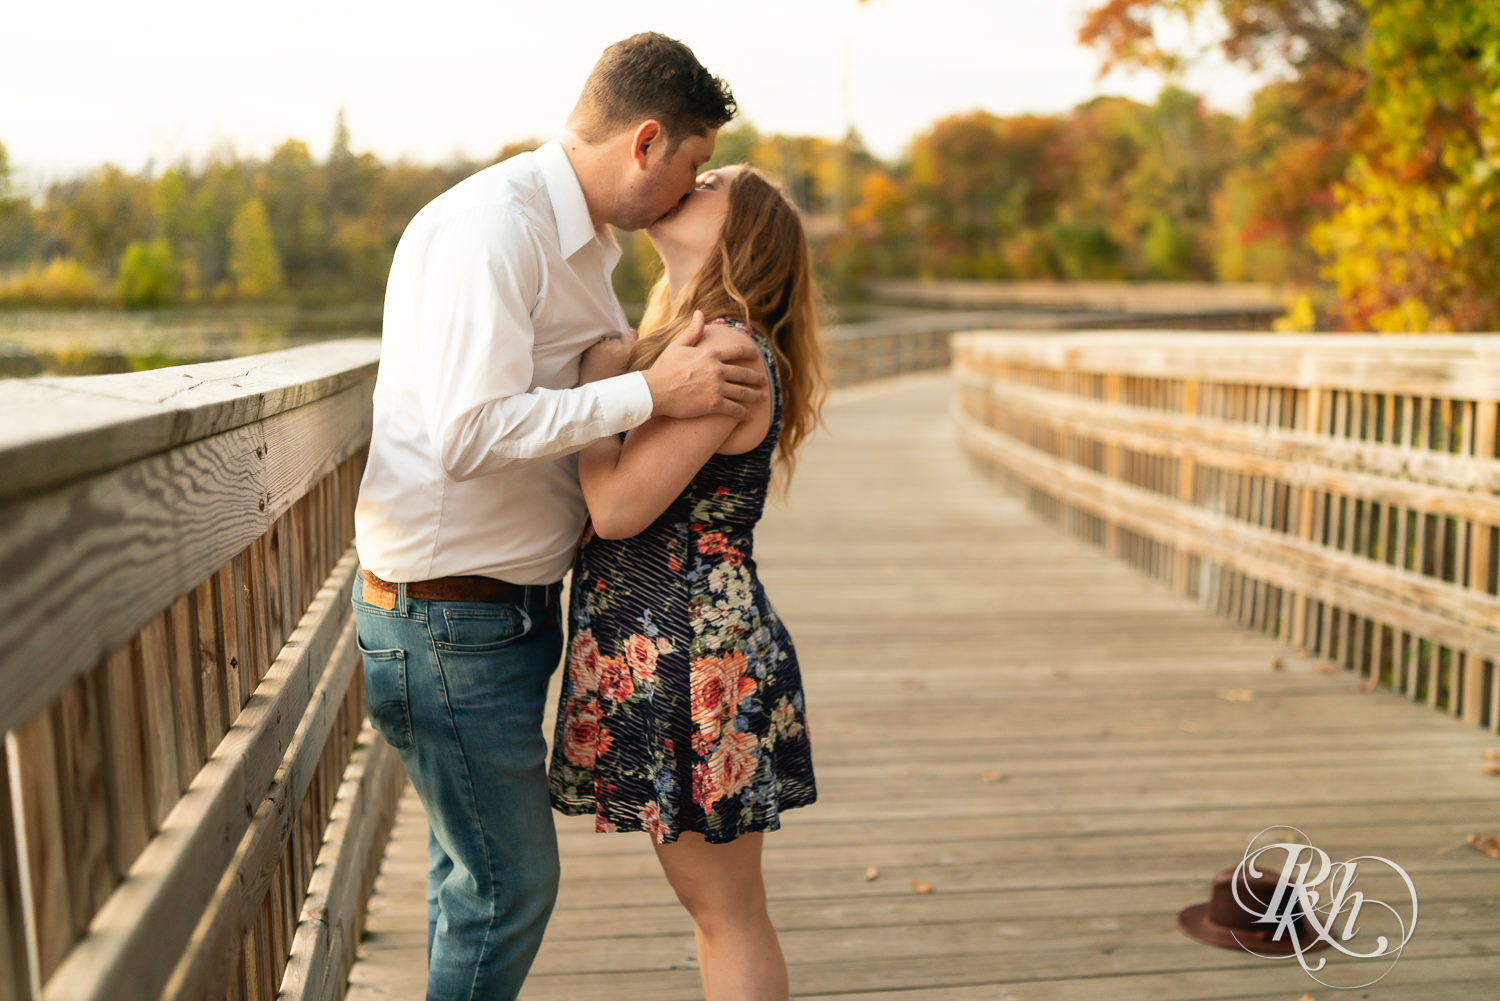 Man in hat and jeans and woman in dress kiss on bridge at Lebanon Hills Regional Park in Eagan, Minnesota.